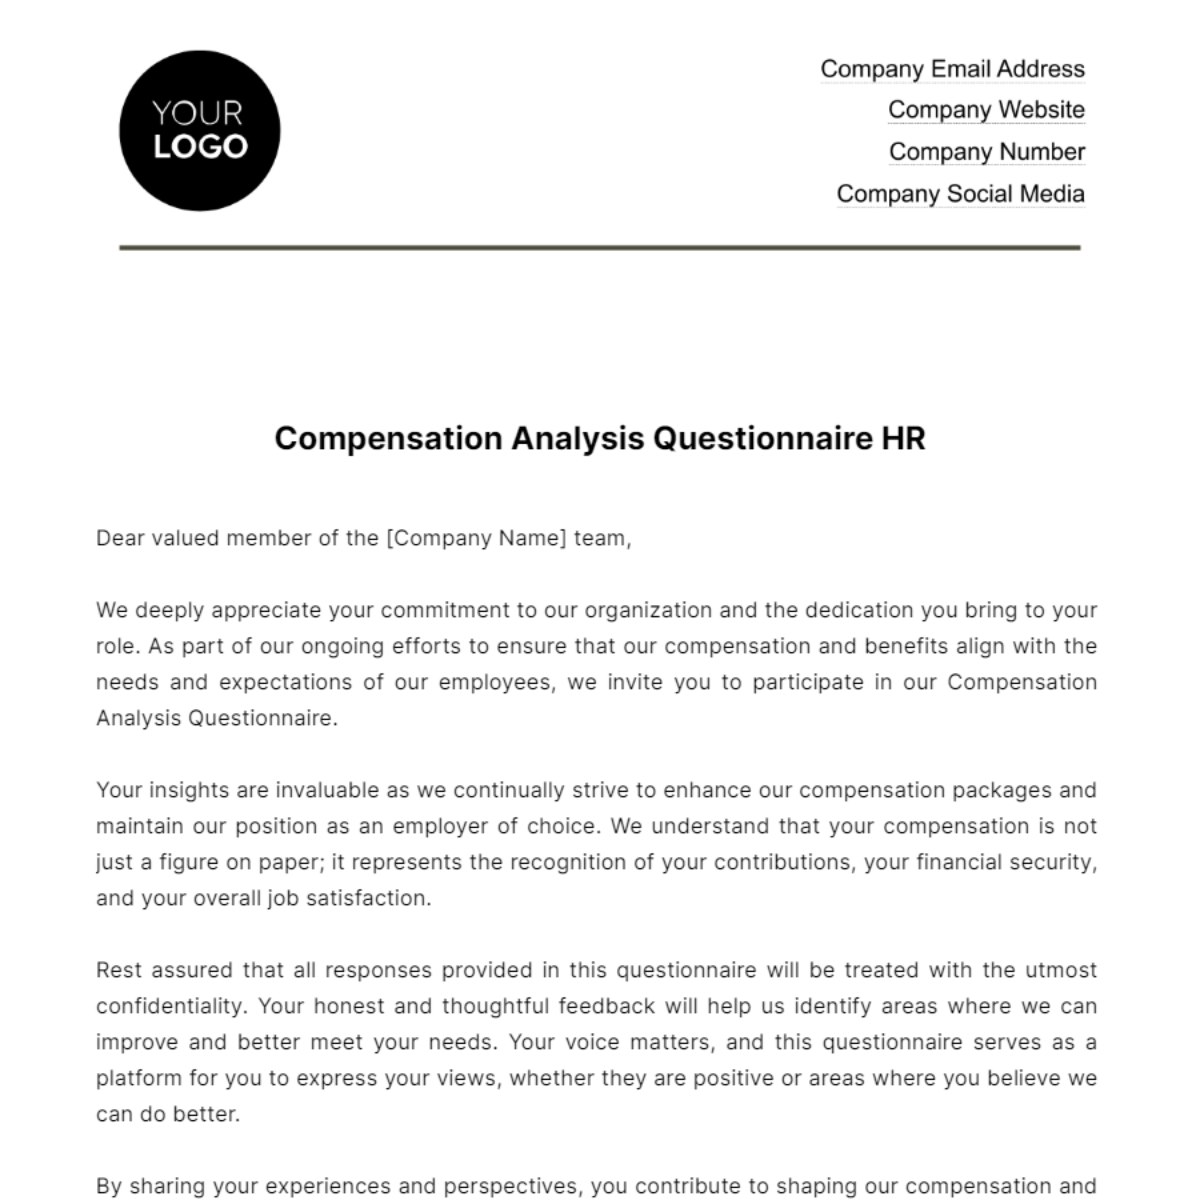 Free Compensation Analysis Questionnaire HR Template